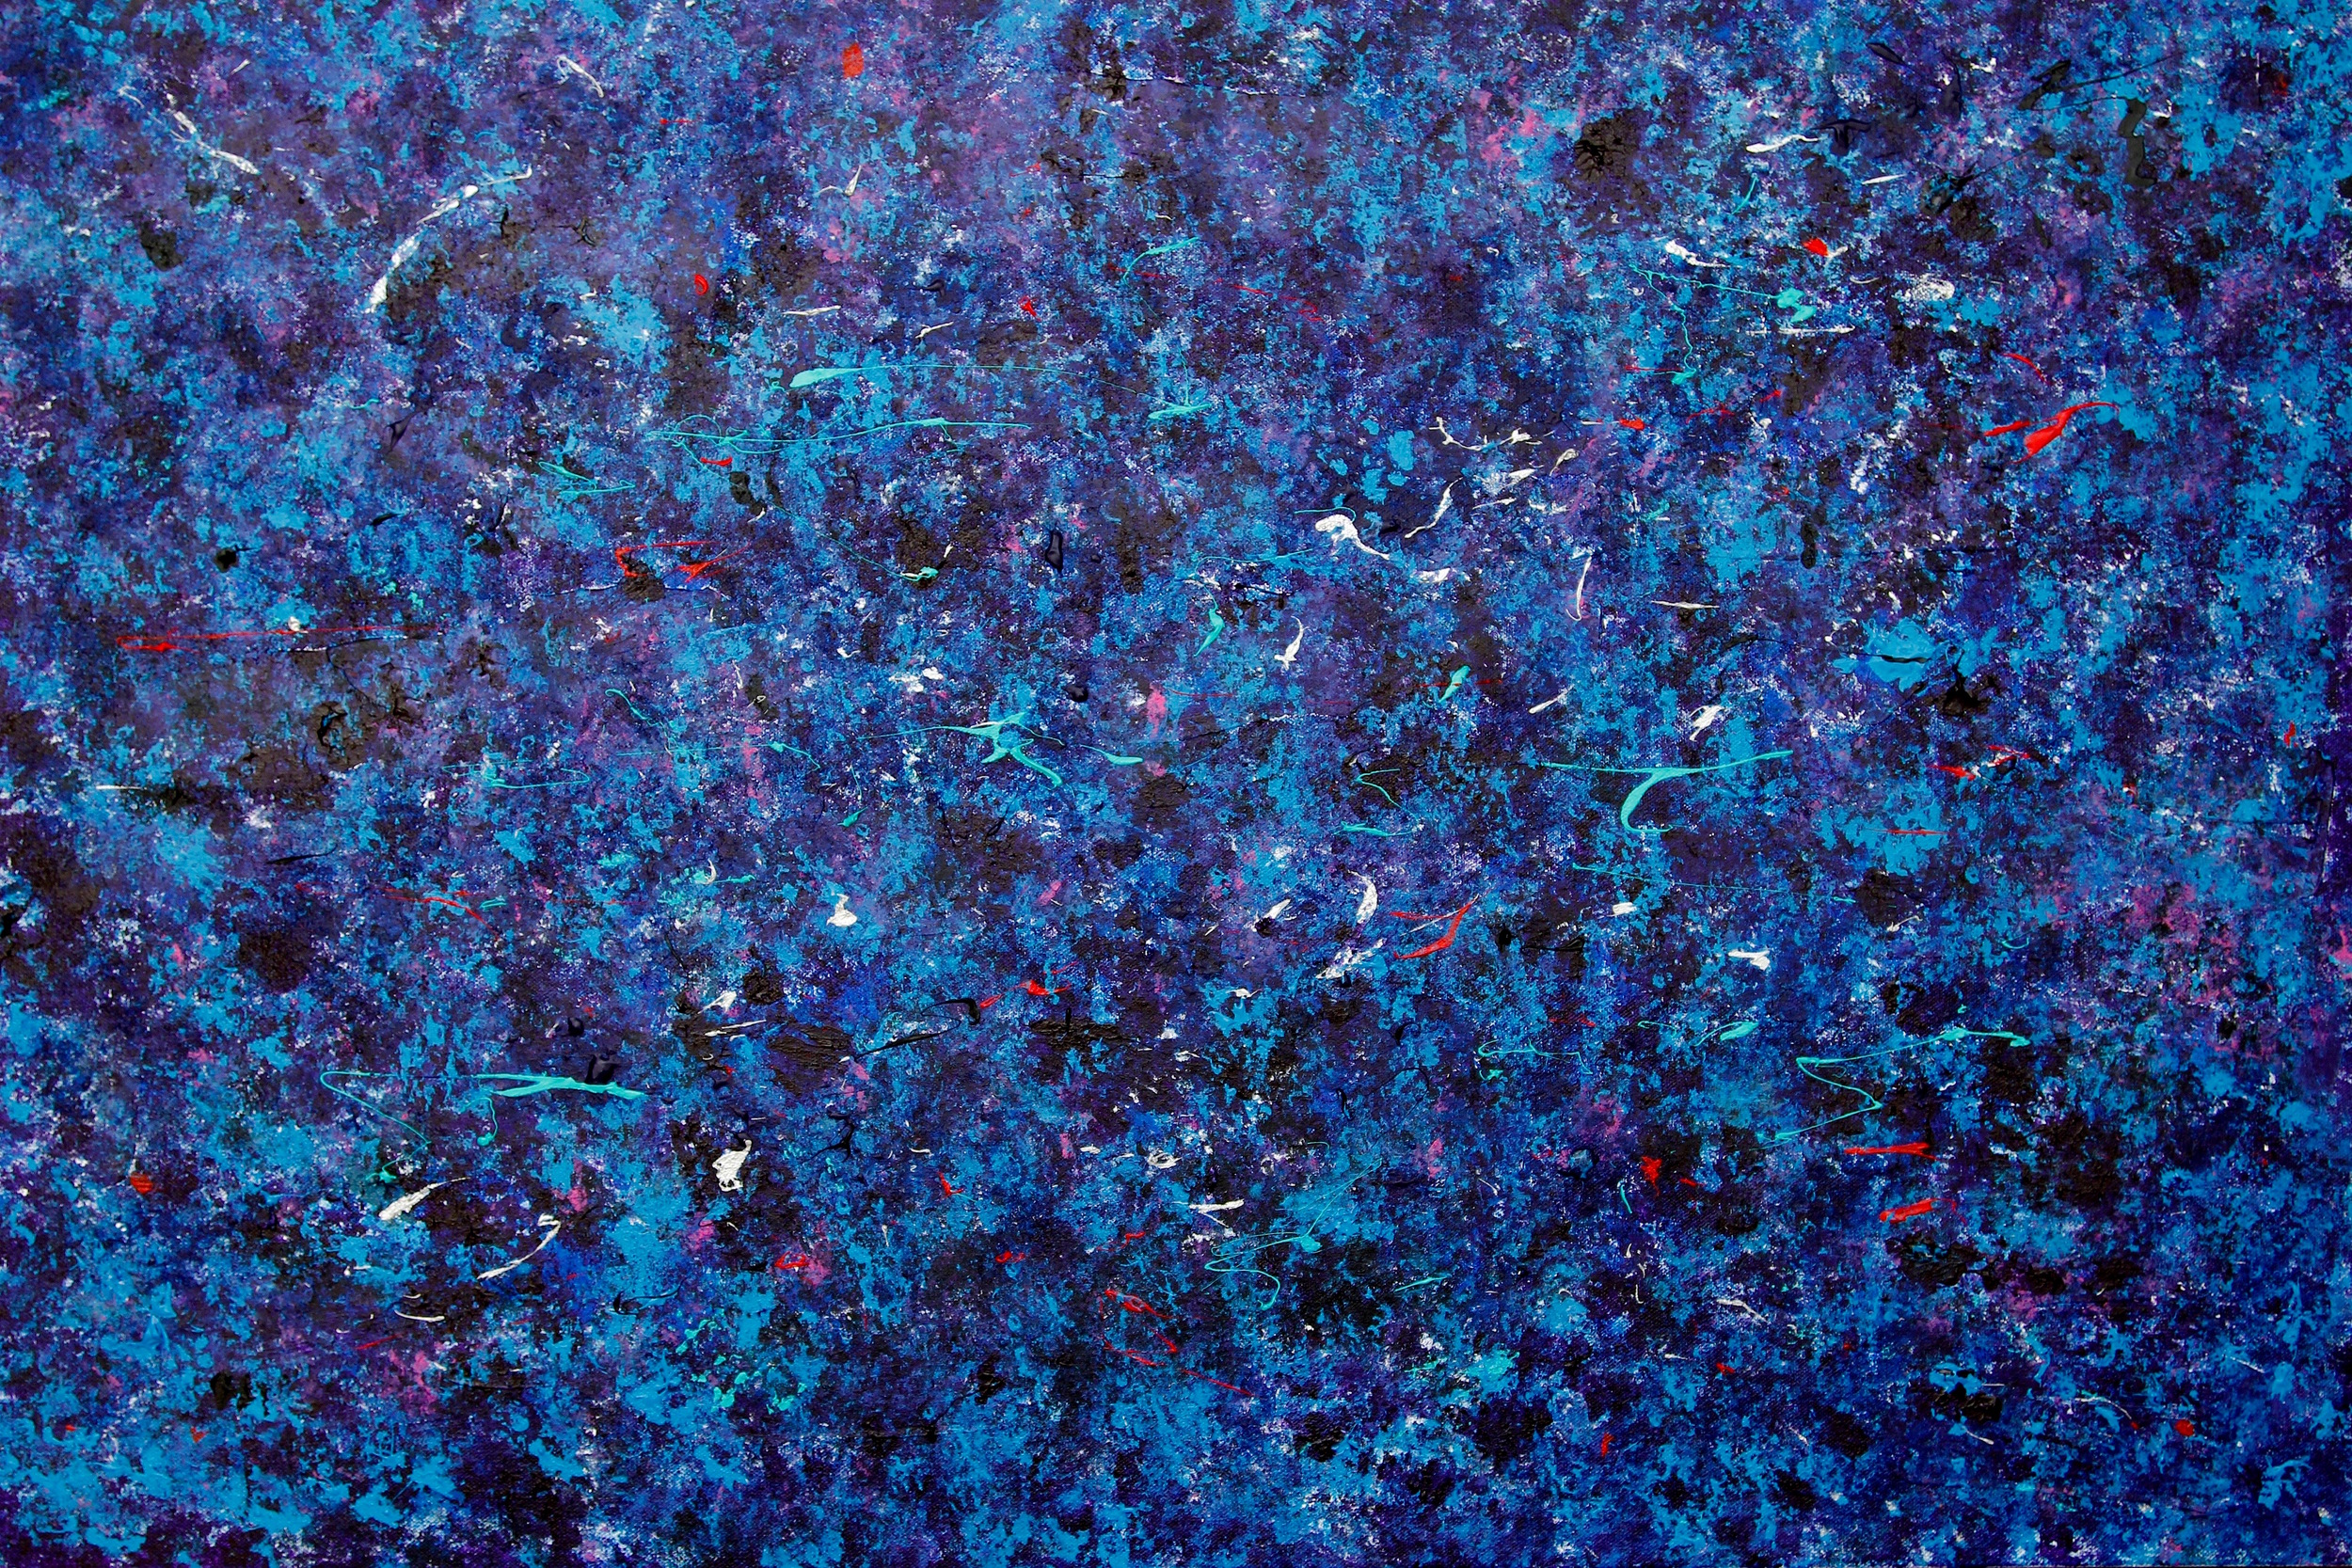   Blue Coral    Acrylic on Canvas    24 x 36 x 1.5 in.  